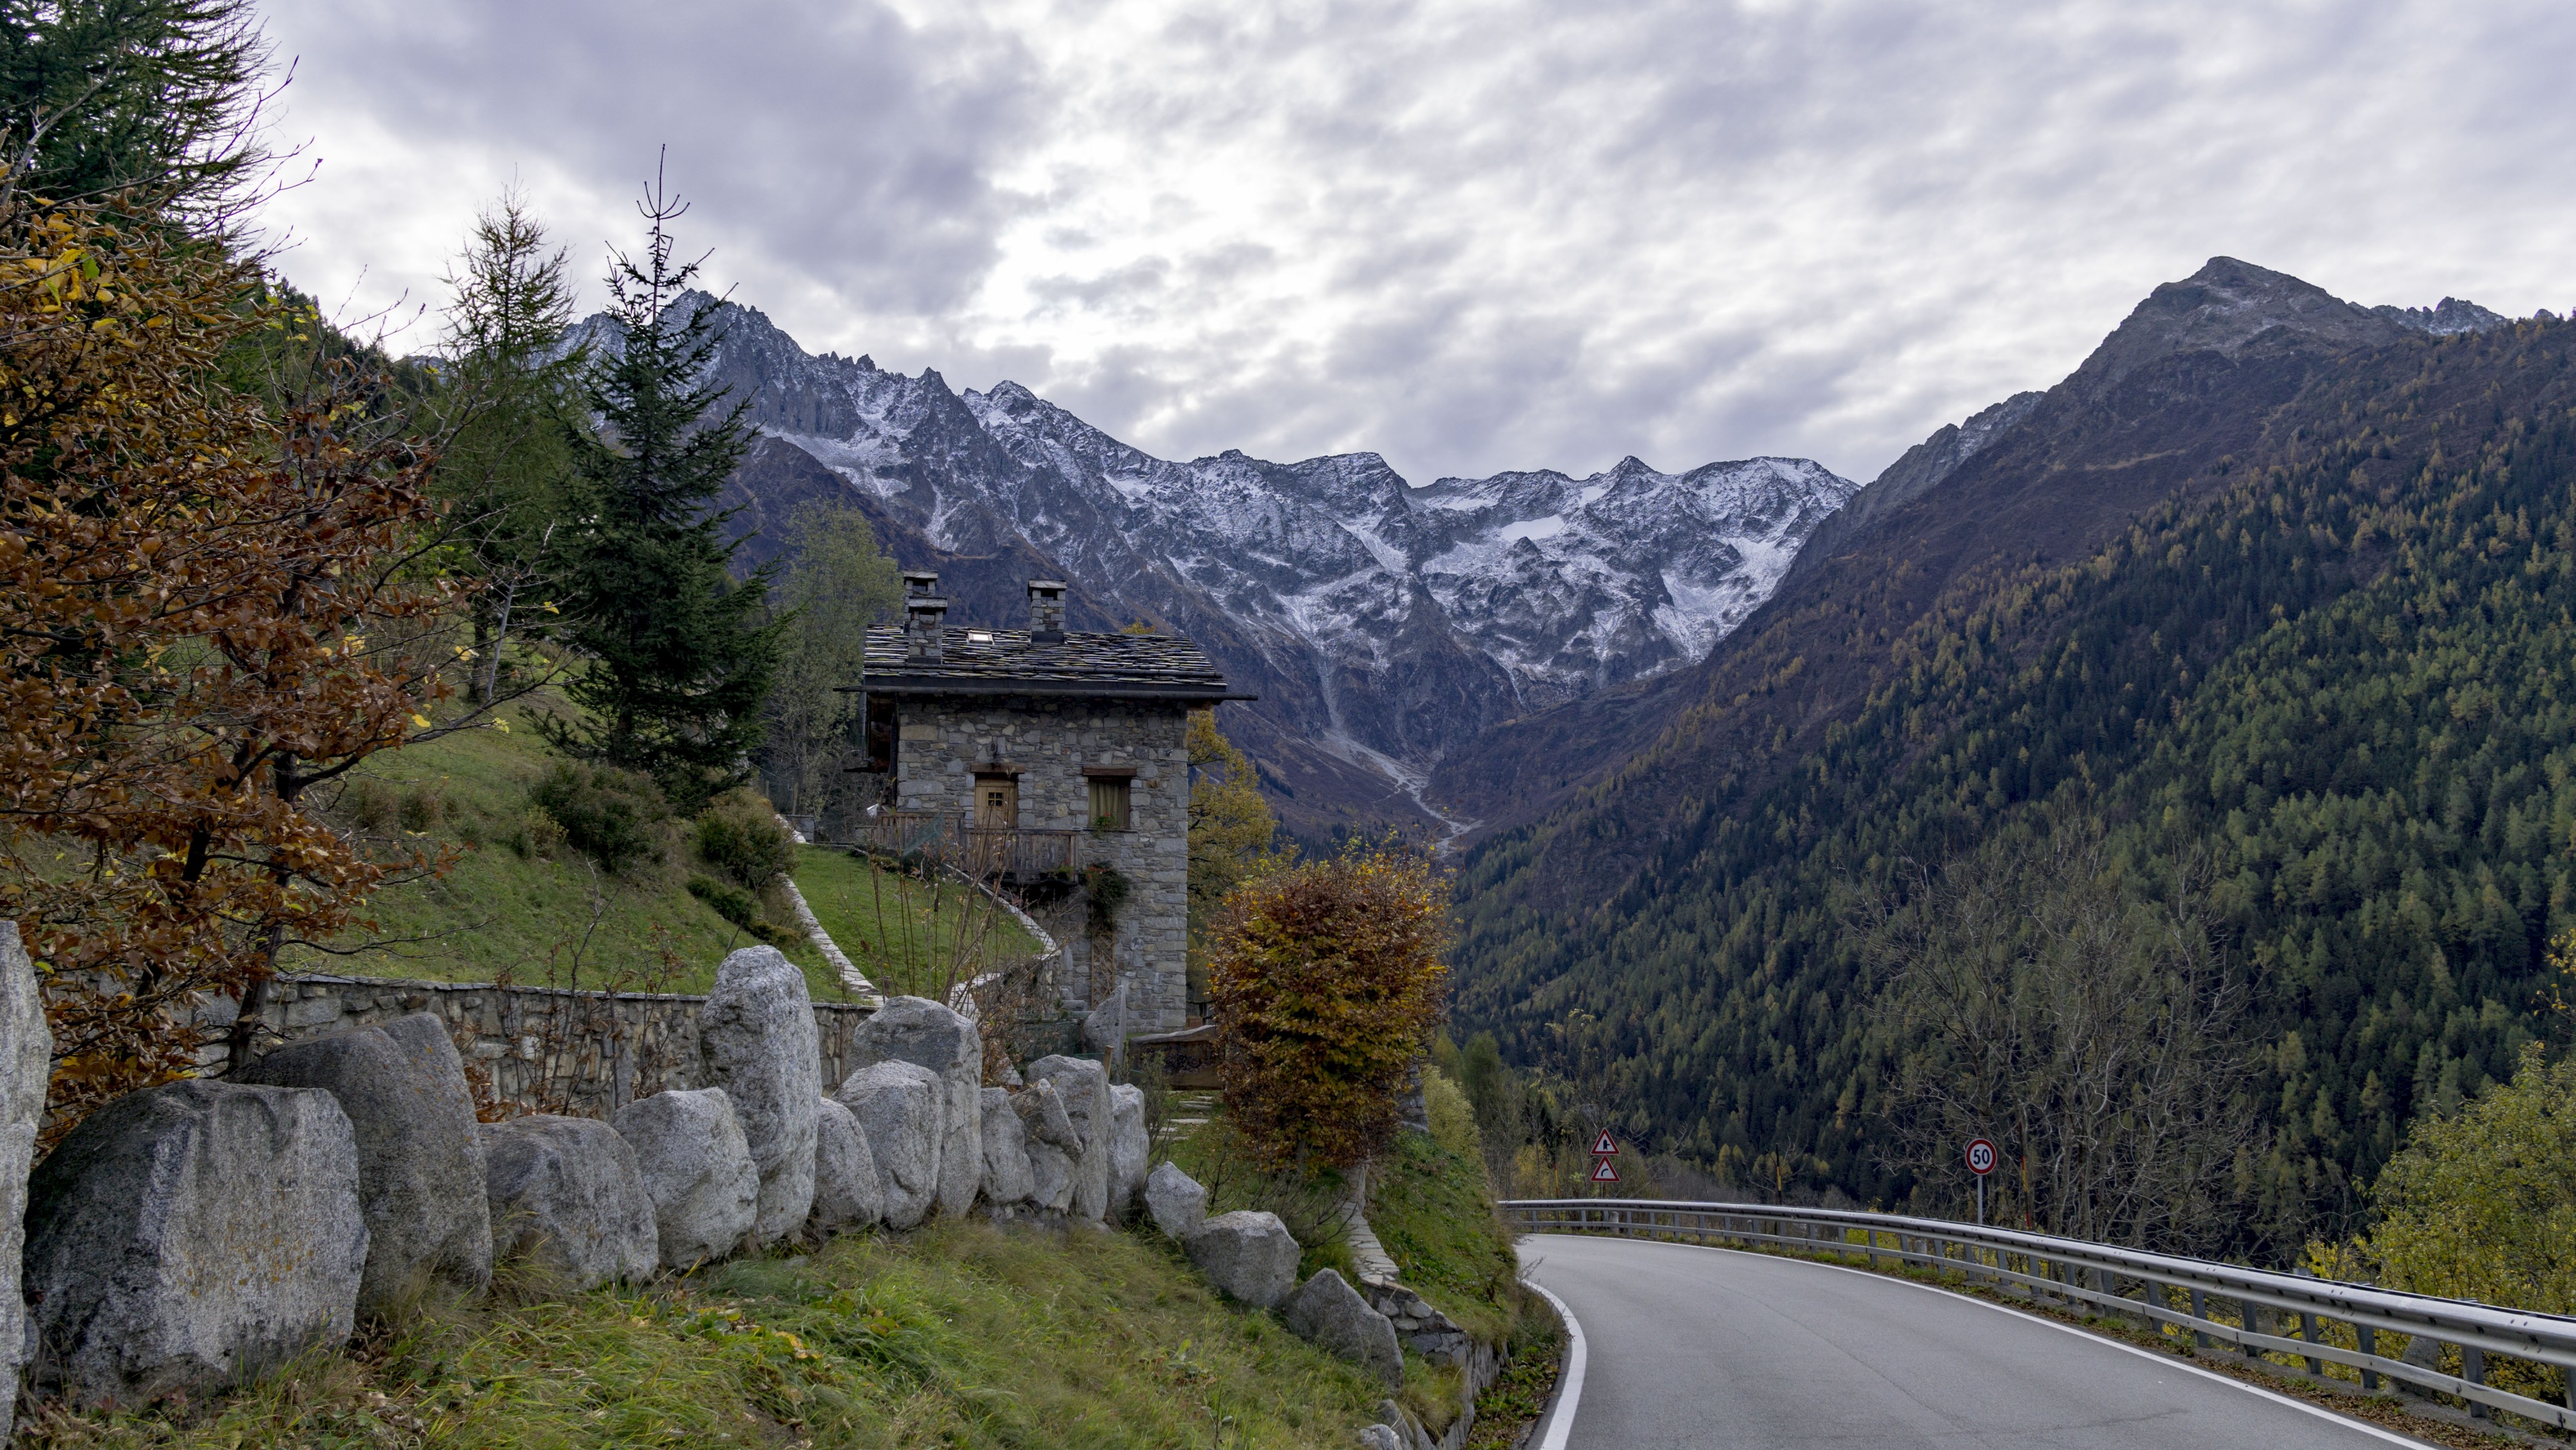 4-alps-dolomites-cabin-rusitc-fall-mountains-road-italy - Worldwide ...